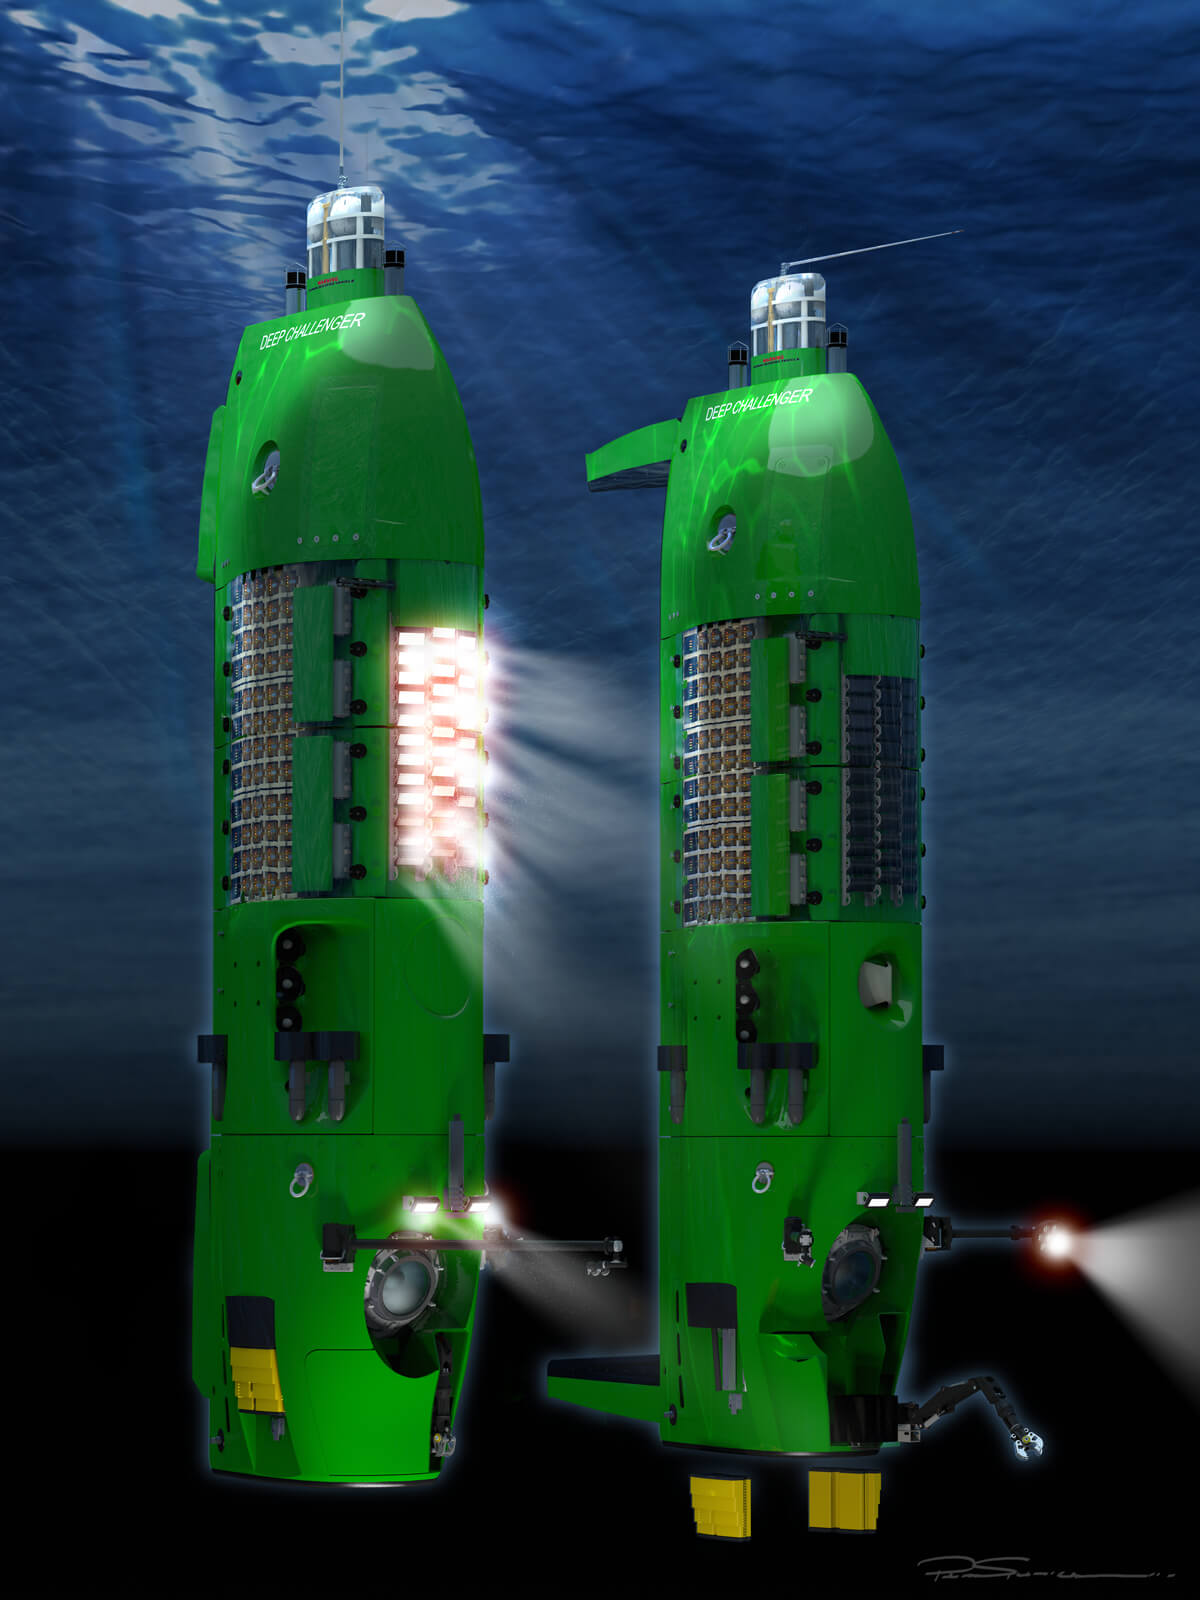 The DEEPSEA CHALLENGER deep-sea submarine from the company's website